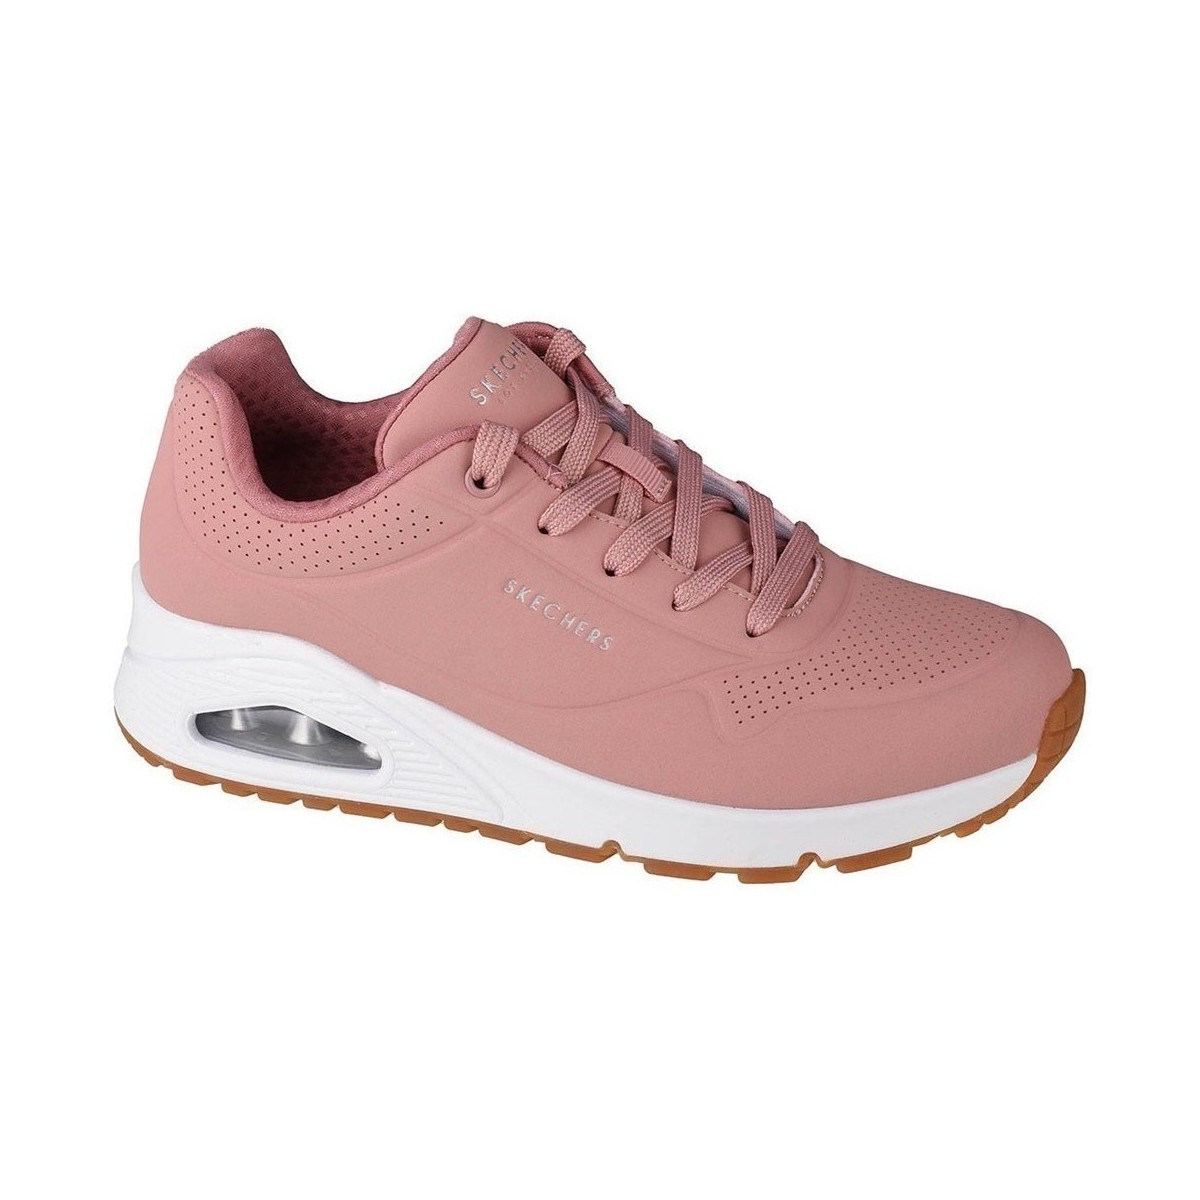 Chaussures Femme Baskets basses Skechers Unostand ON Air Rose